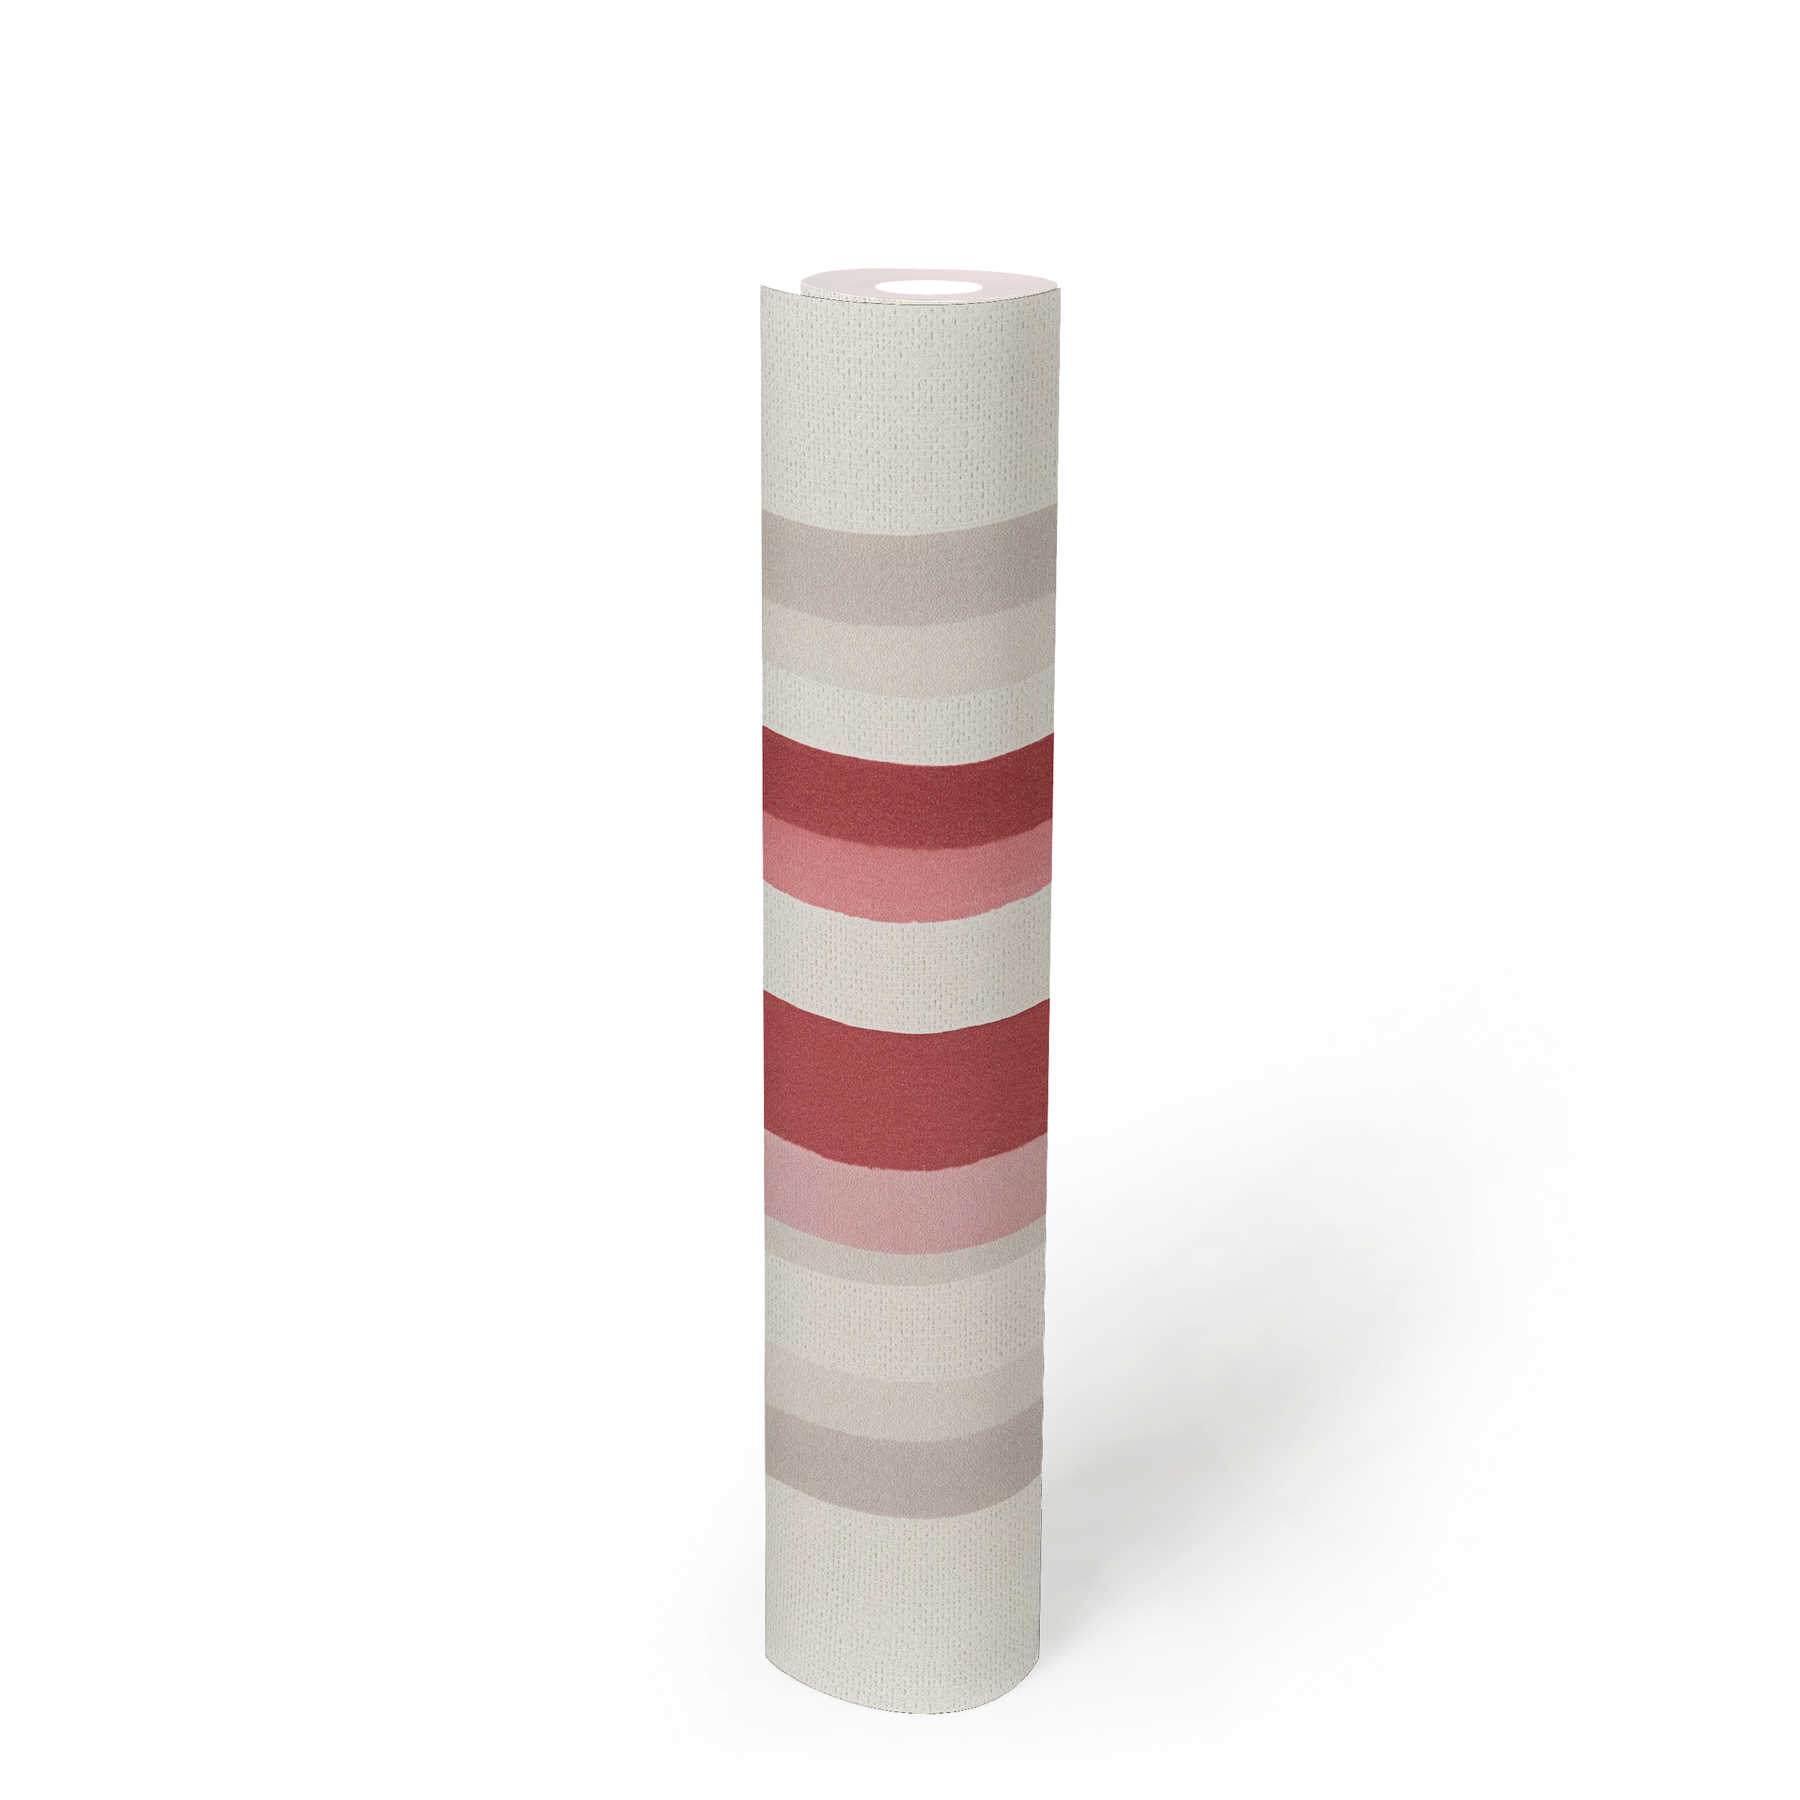             Non-woven wallpaper striped with colourful lines - beige, red
        